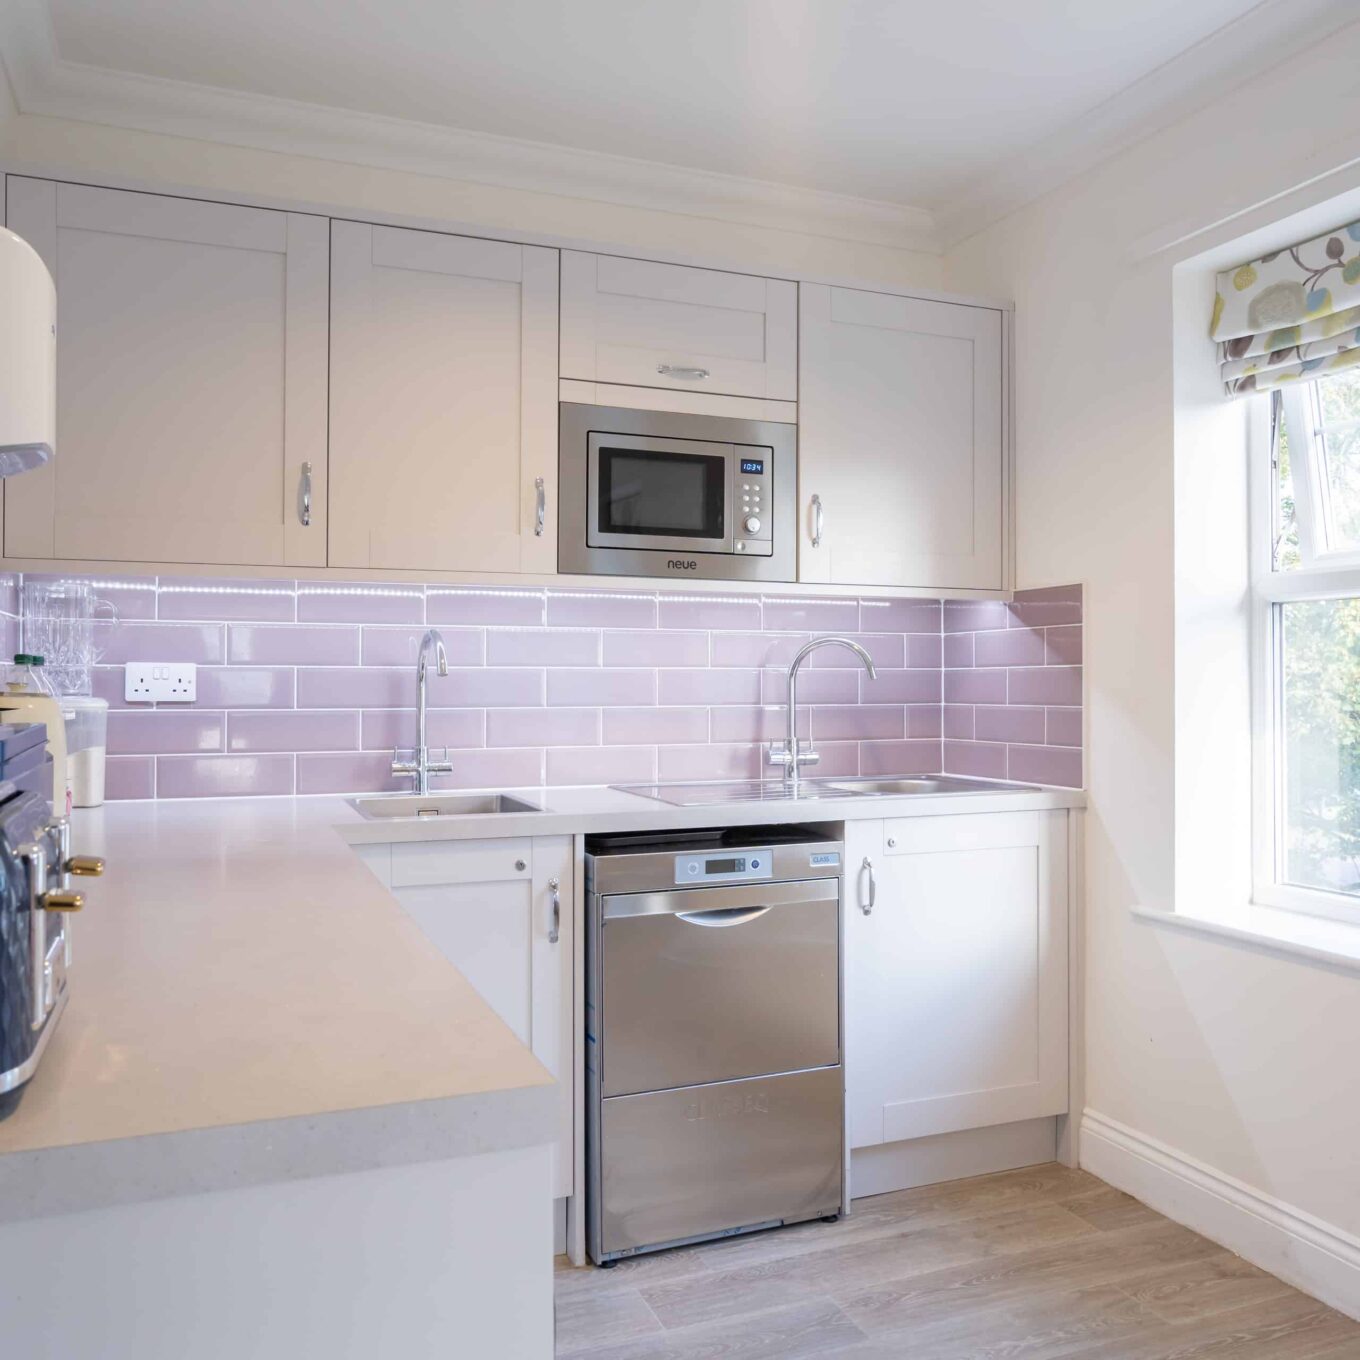 Kitchen facility with a toaster, microwave and sink at Woodland Grove Care Home in Loughton